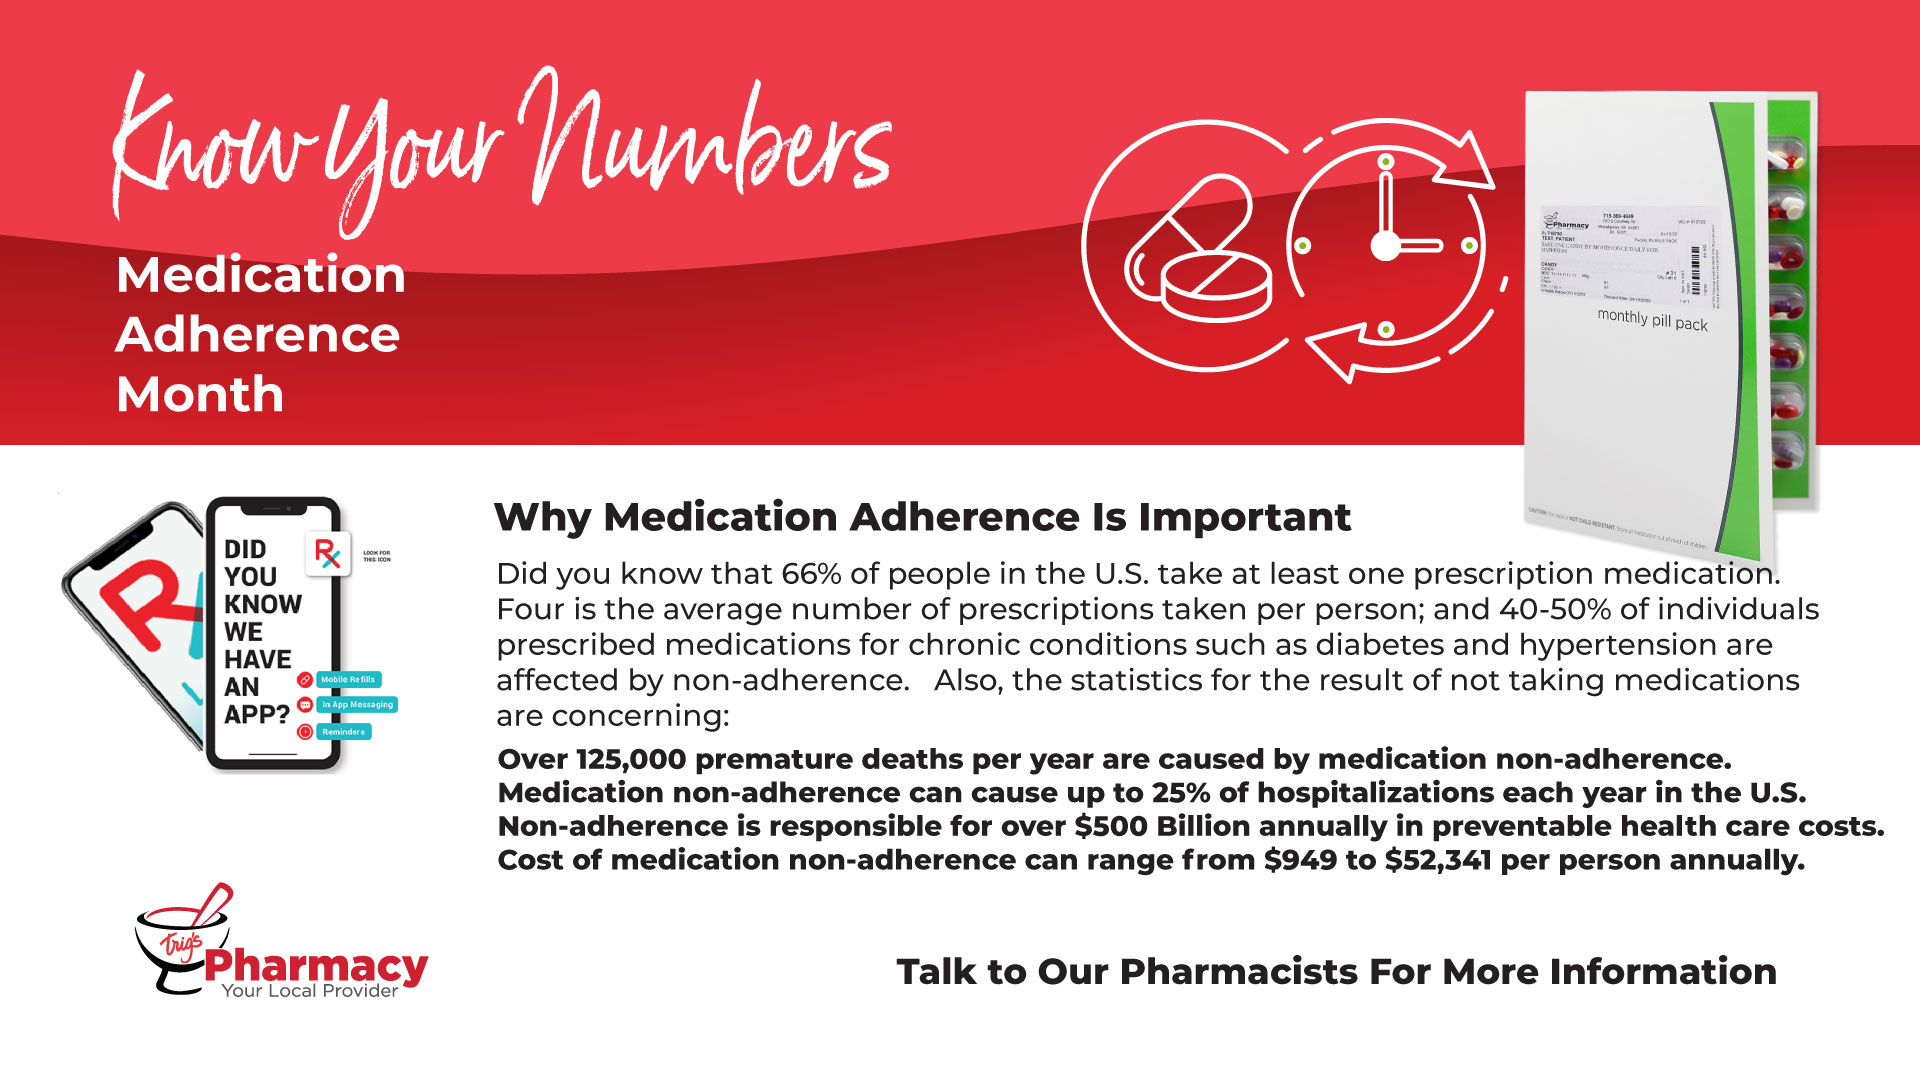 Download your August Know Your Numbers Medication Adherence Guide.